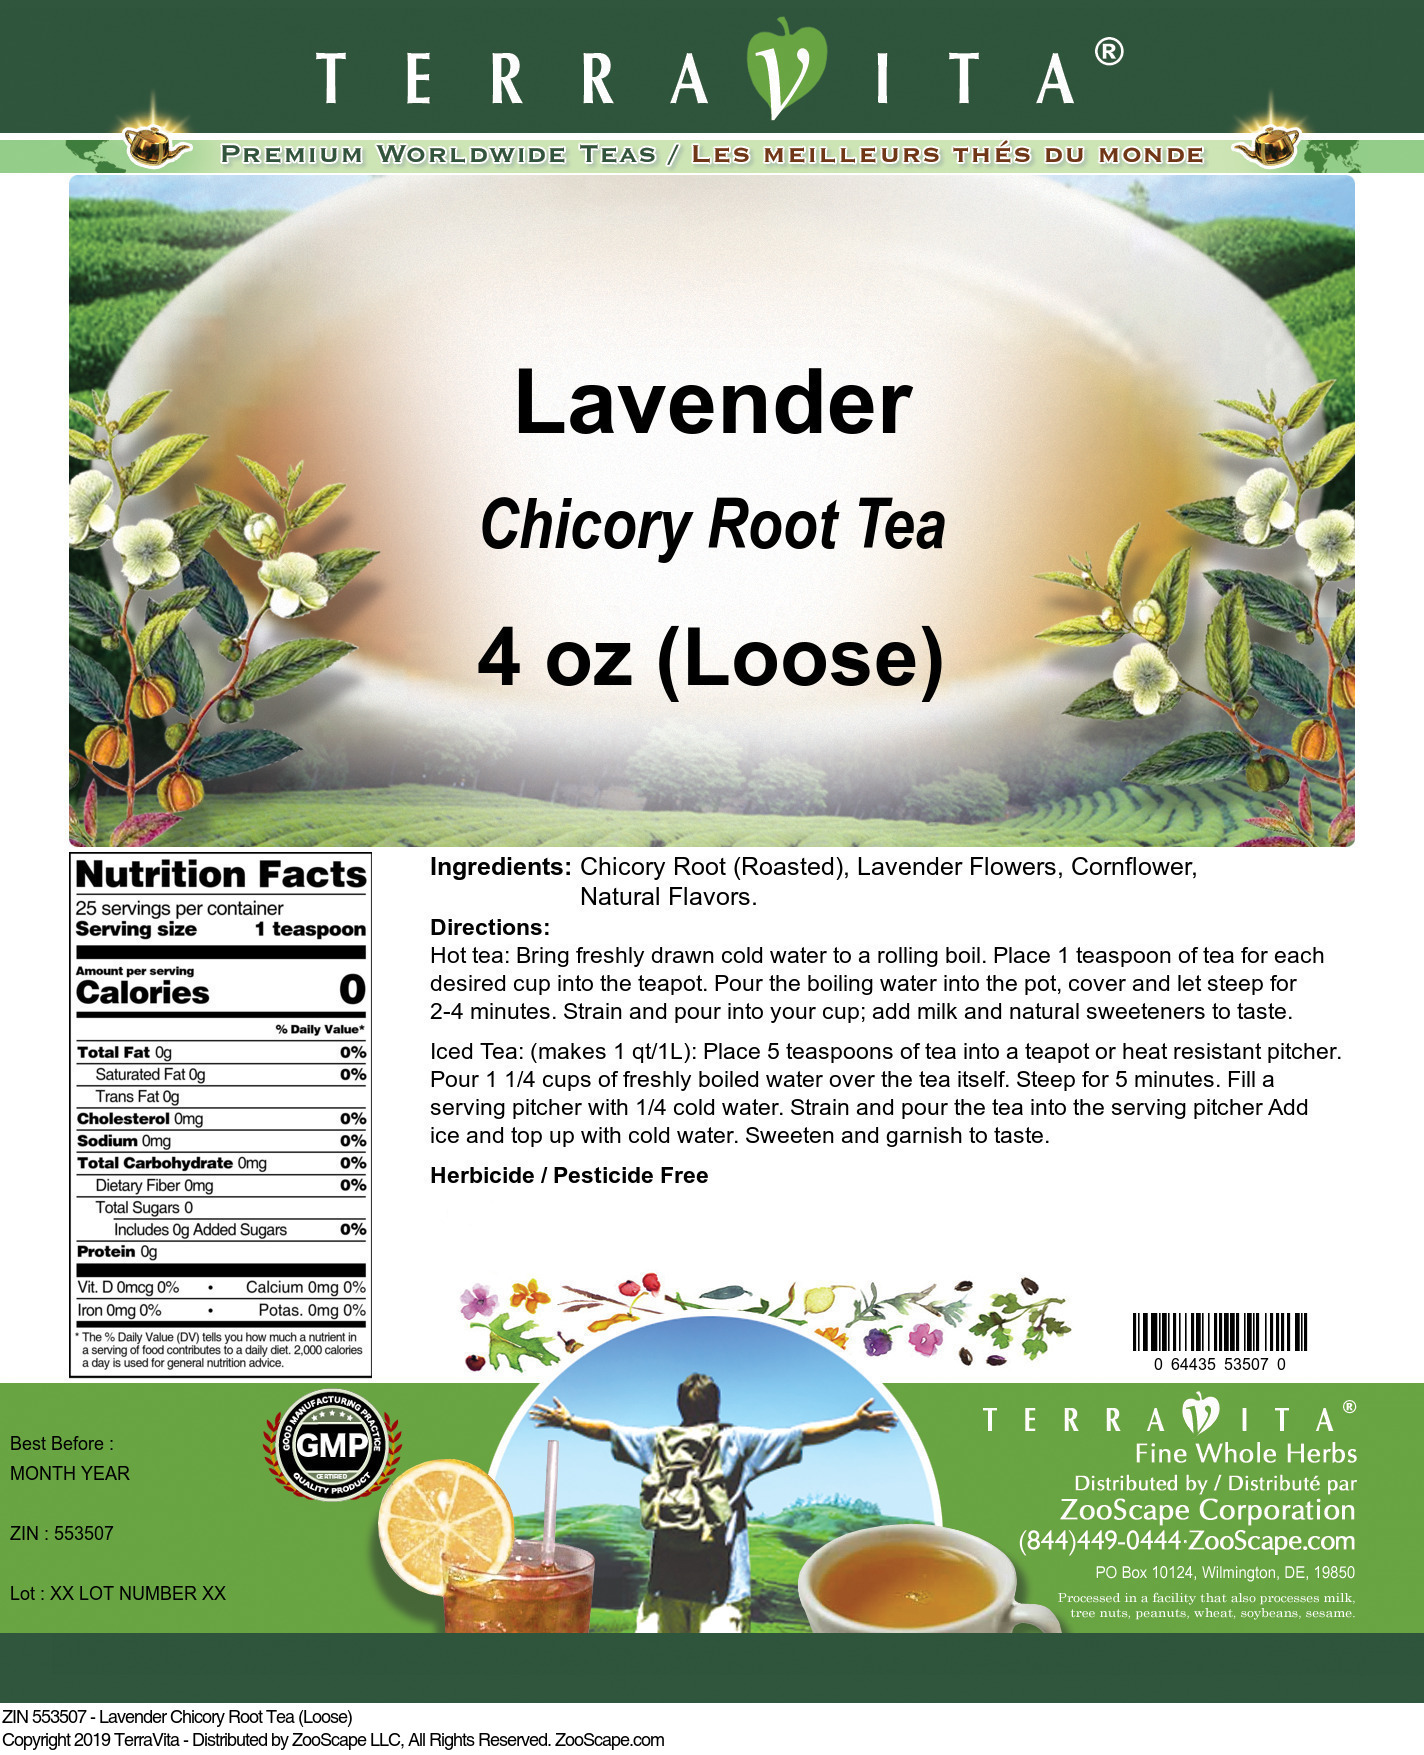 Lavender Chicory Root Tea (Loose) - Label